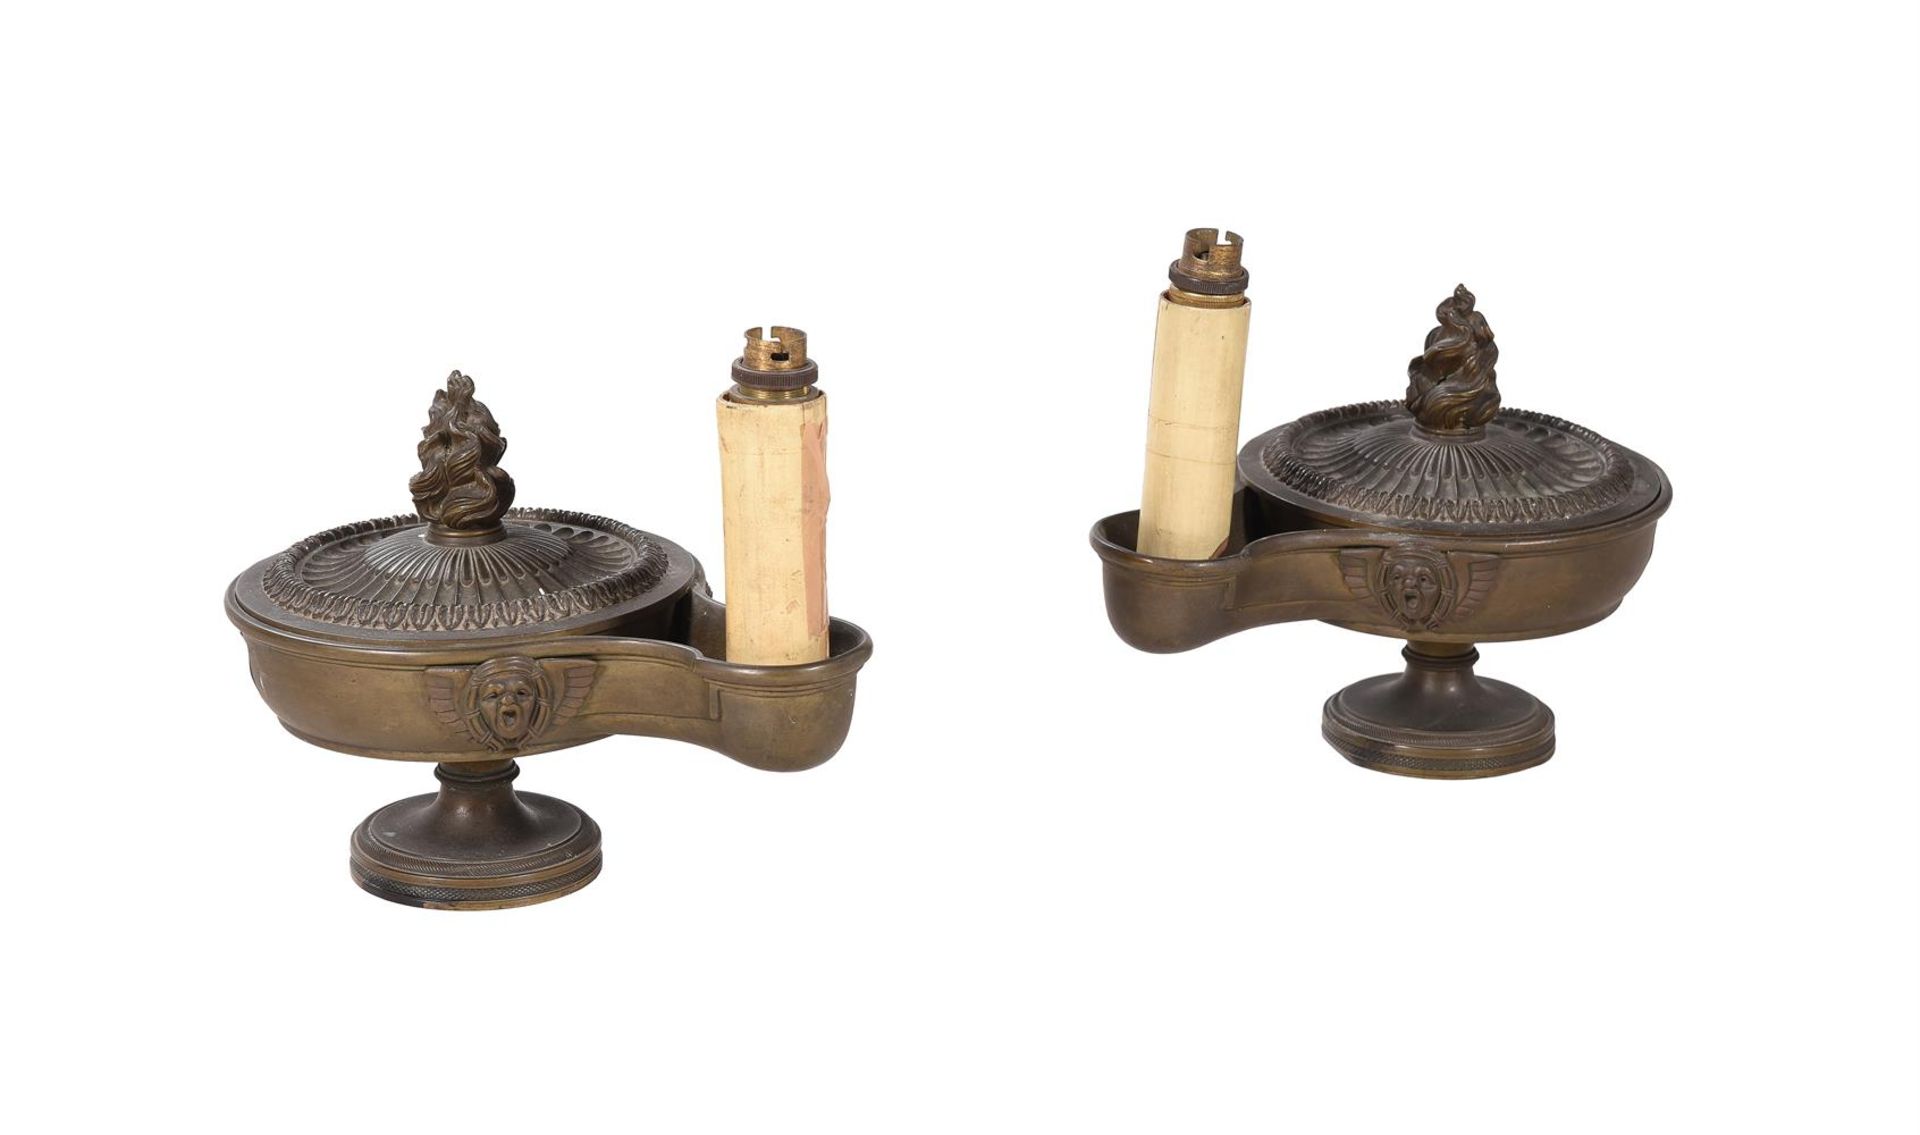 AFTER WILLIAM BULLOCK, A PAIR OF REGENCY BRONZE COLZA OIL LAMPS AND A PAIR OF EARLY 19TH TORCHERES - Image 2 of 4